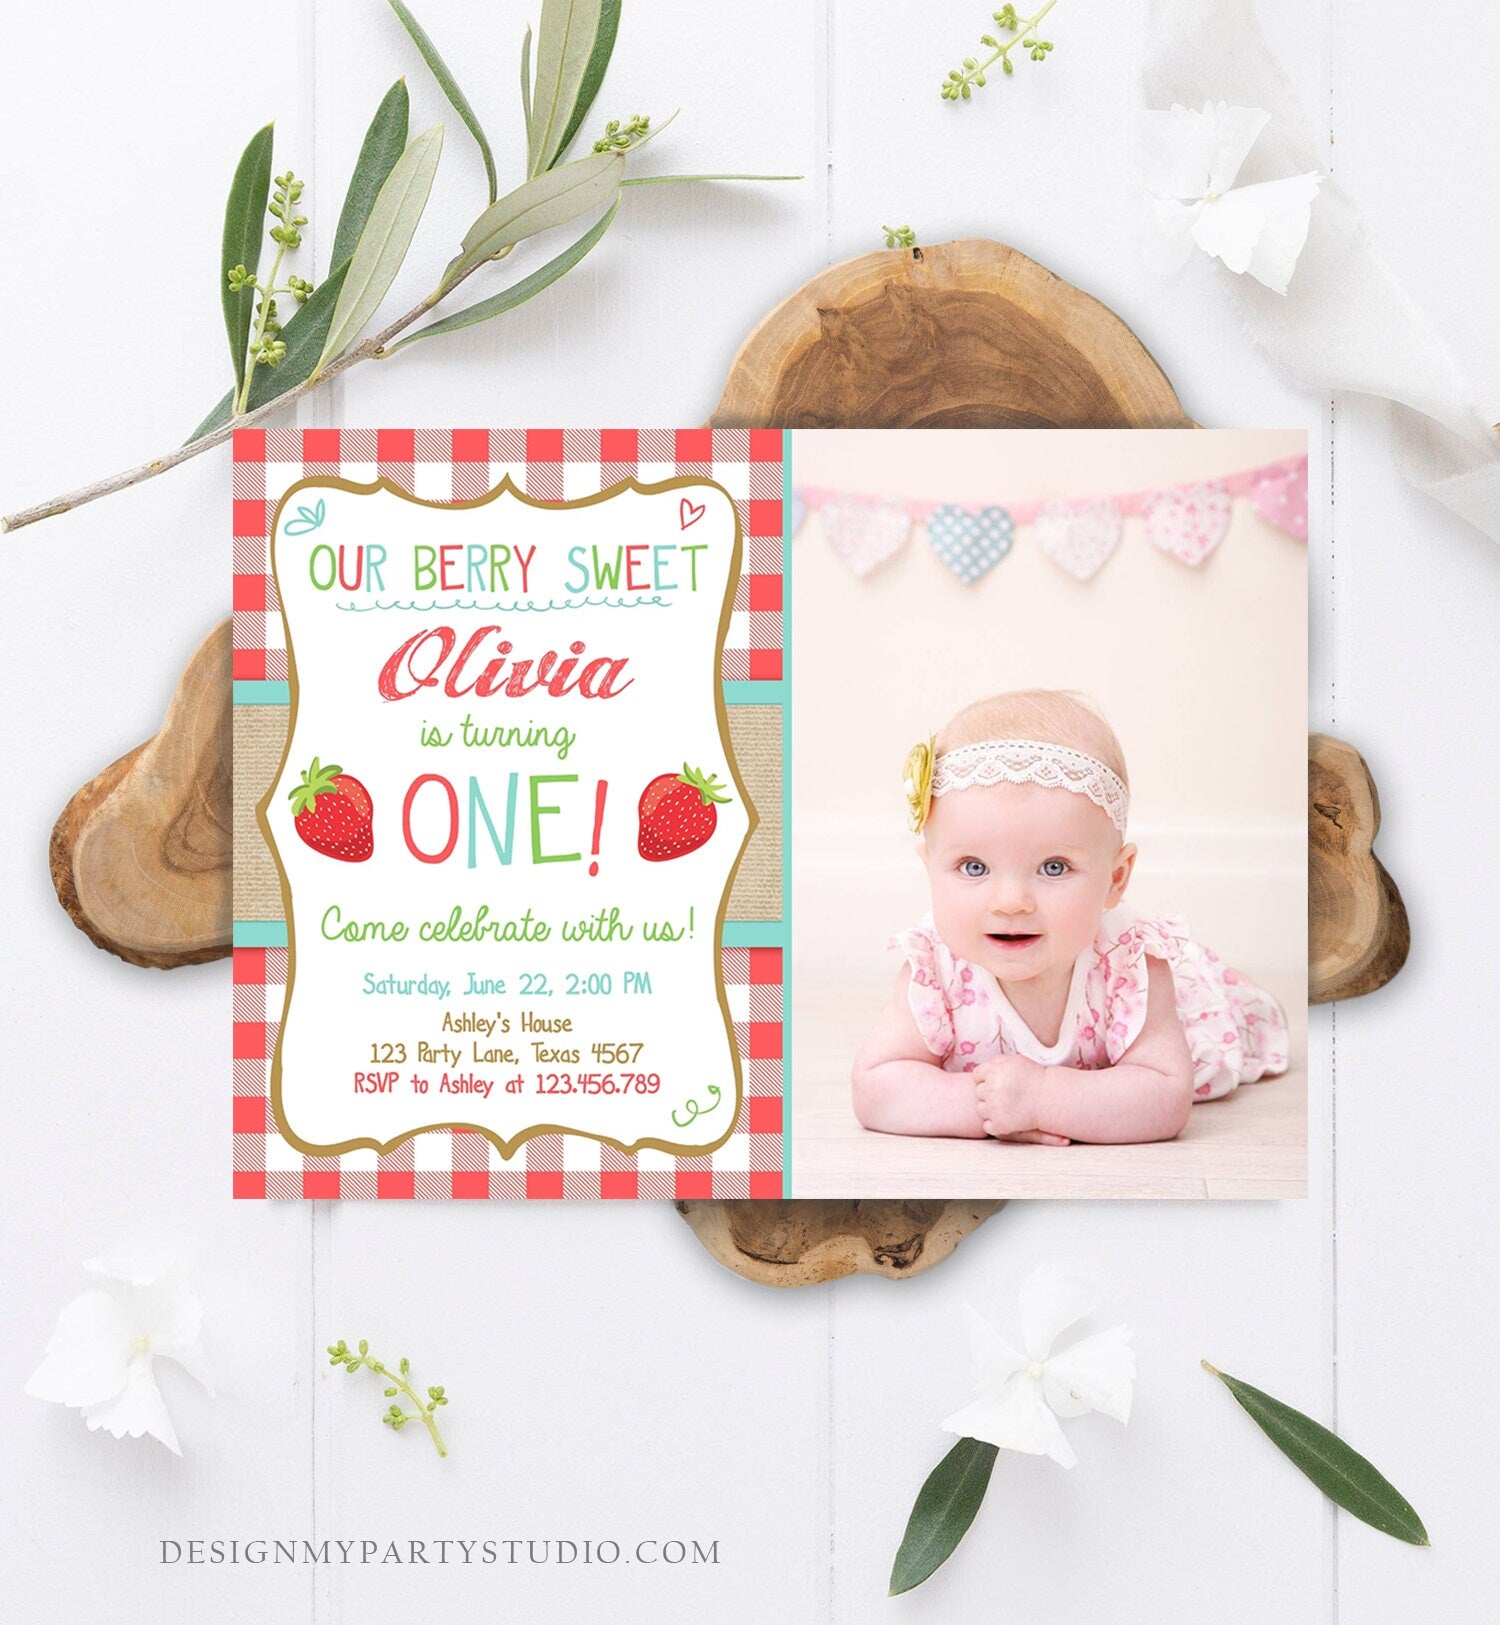 Editable Strawberry Birthday Invitation 1st Birthday Berry Sweet Girl Blue Red Download Printable Invite ANY AGE Template Corjl Digital 0091